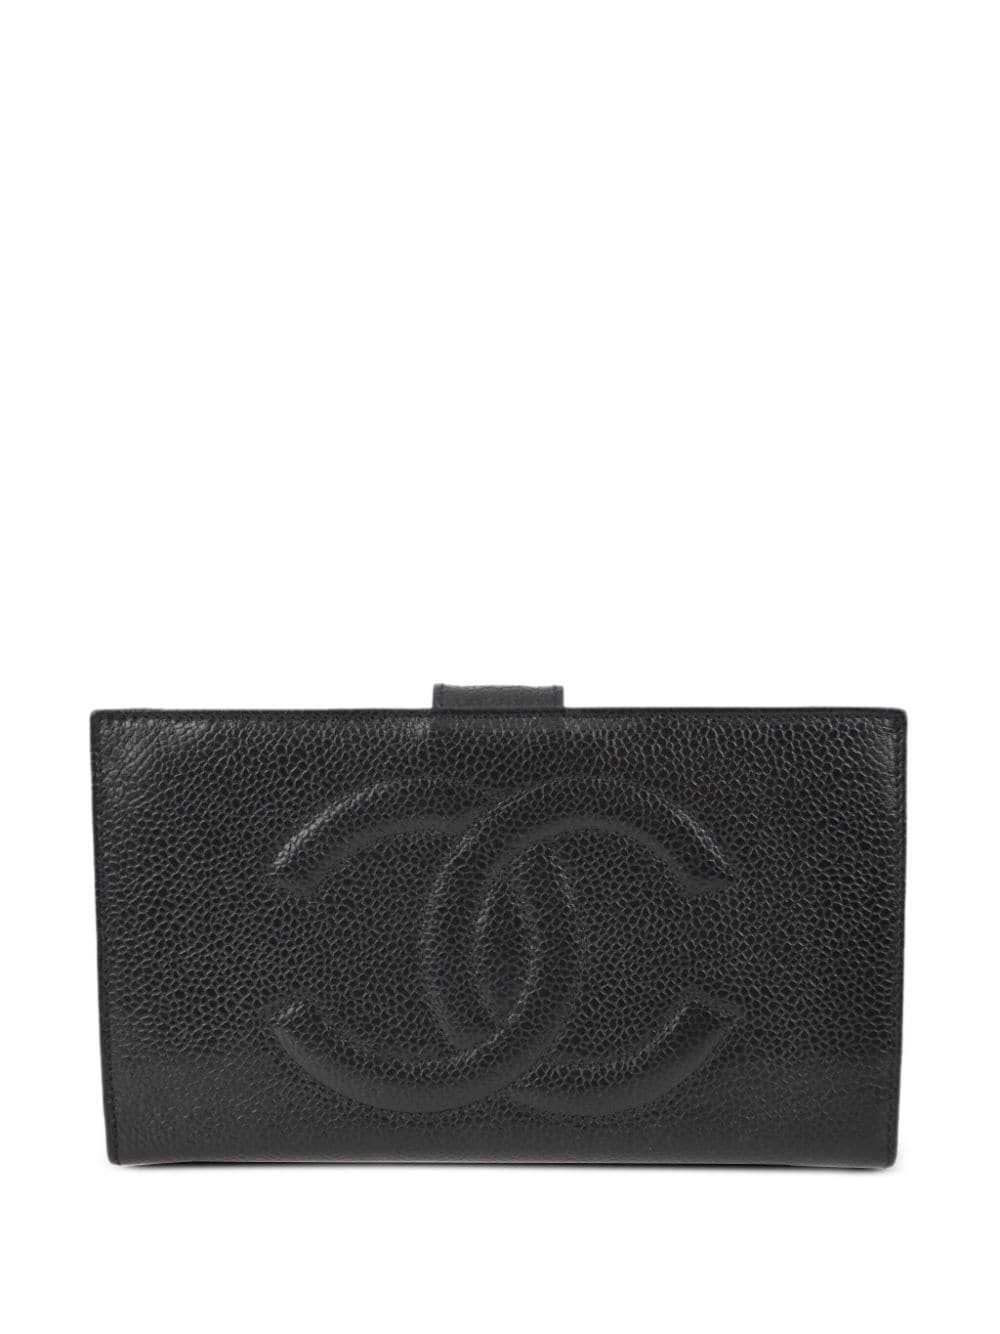 CHANEL Pre-Owned 1997 CC Long leather wallet - Bl… - image 1